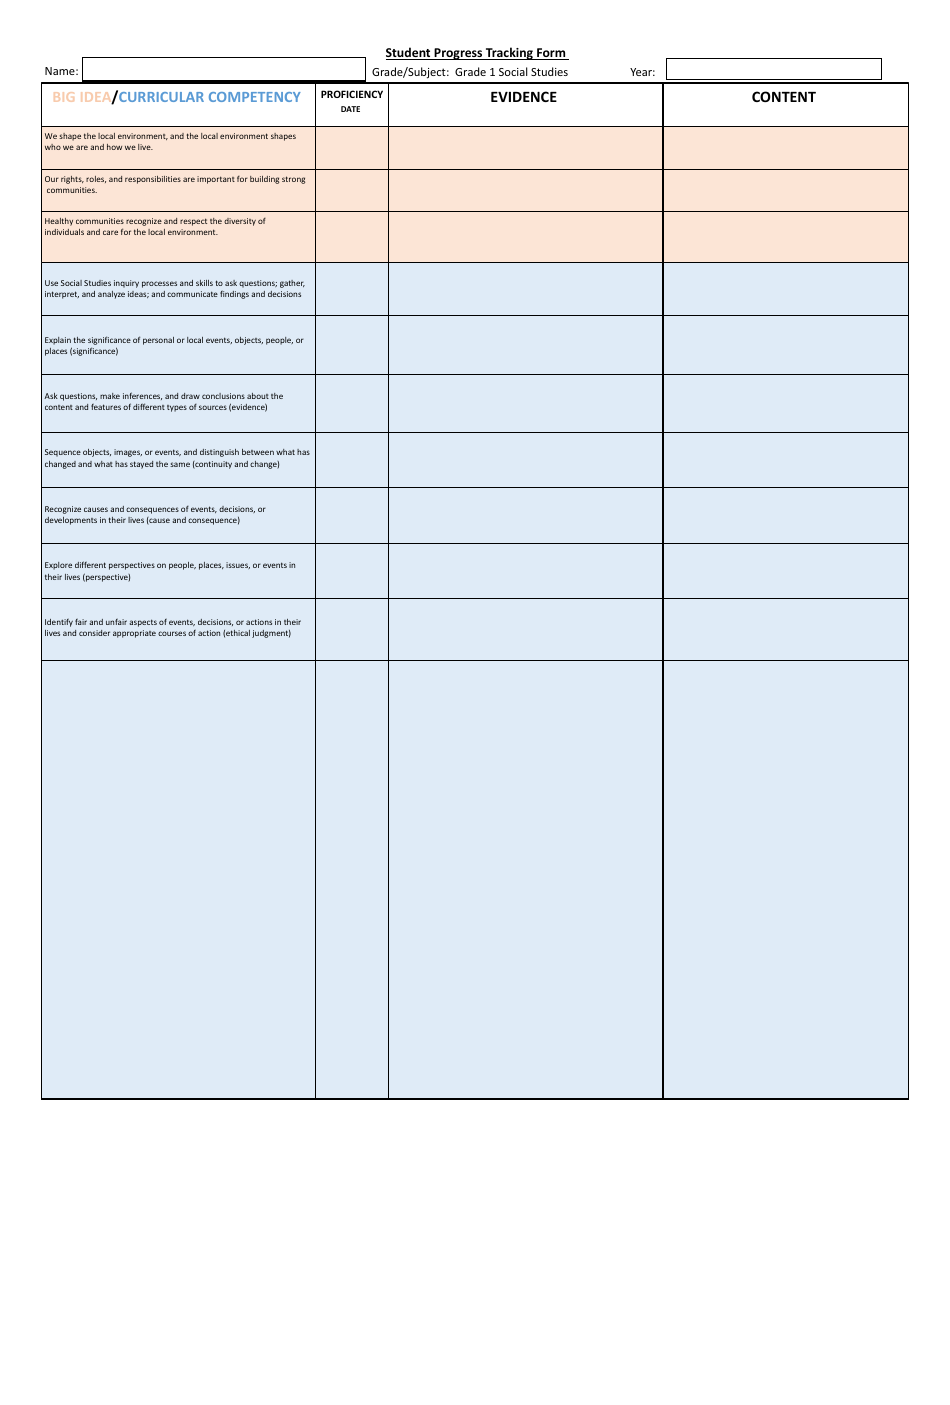 Student Progress Tracking Form - Social Studies, Page 1